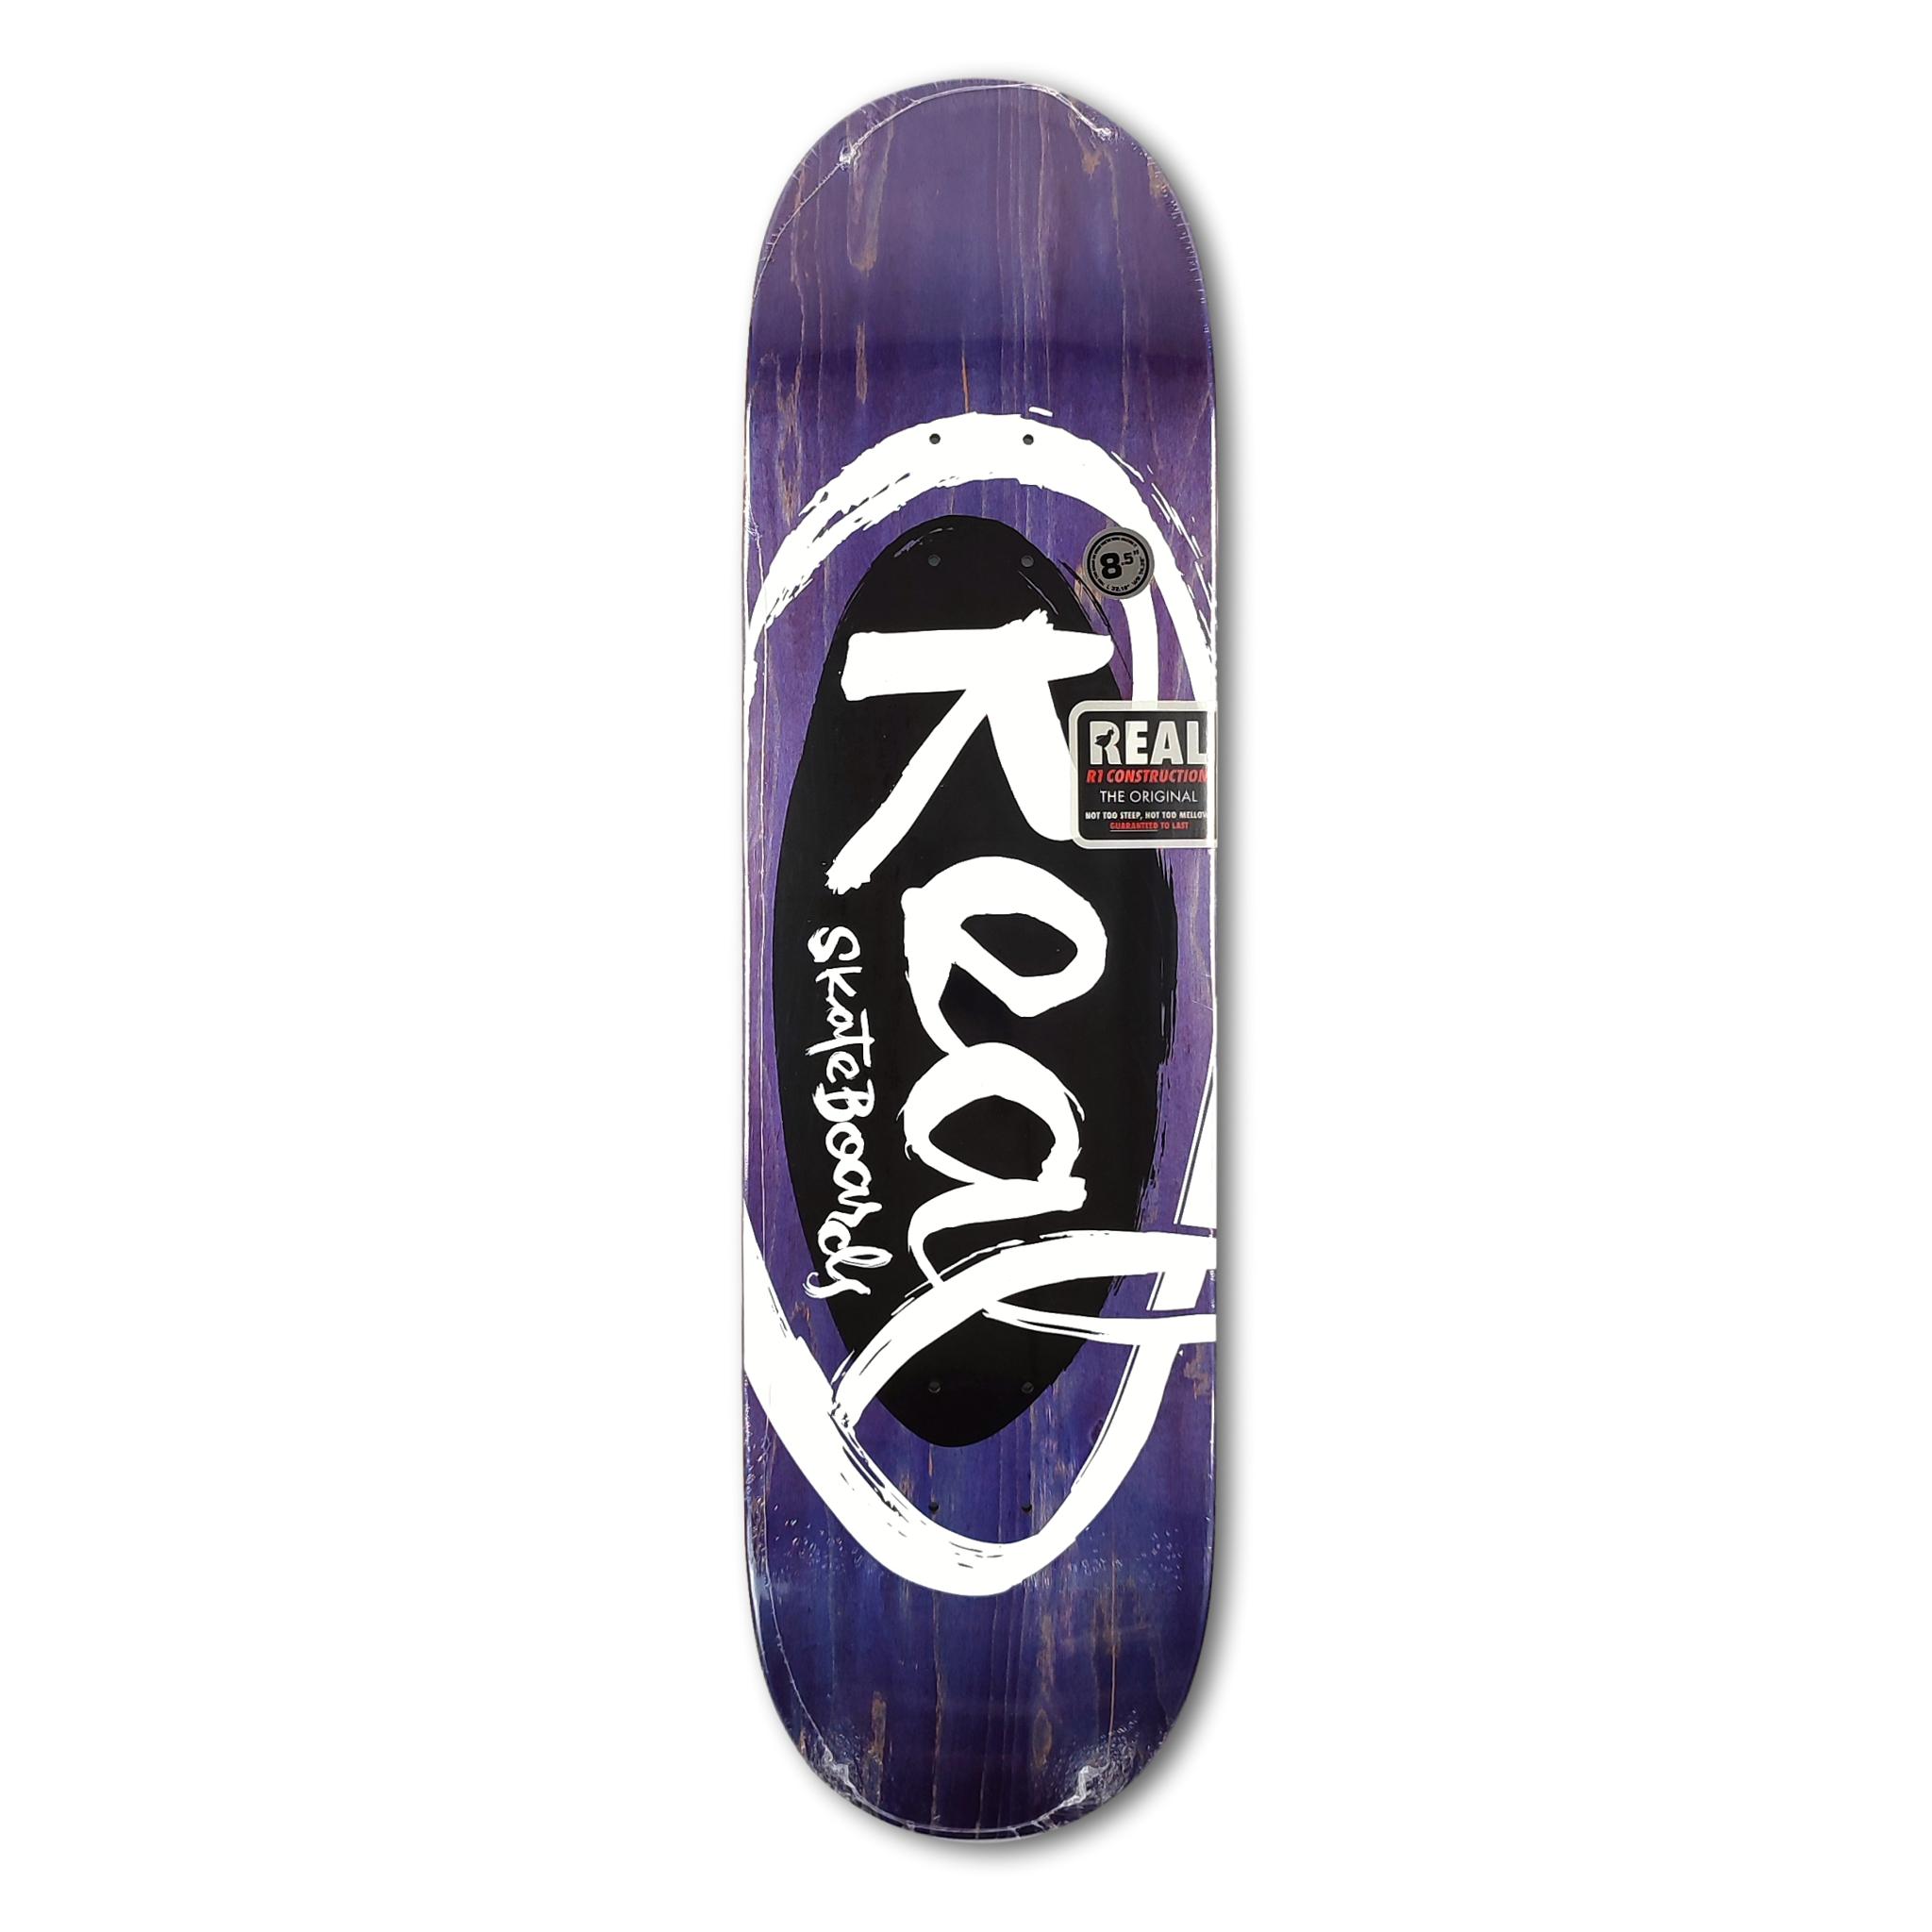 REAL OVAL BY NATAS SKATEBOARD DECK 8.5